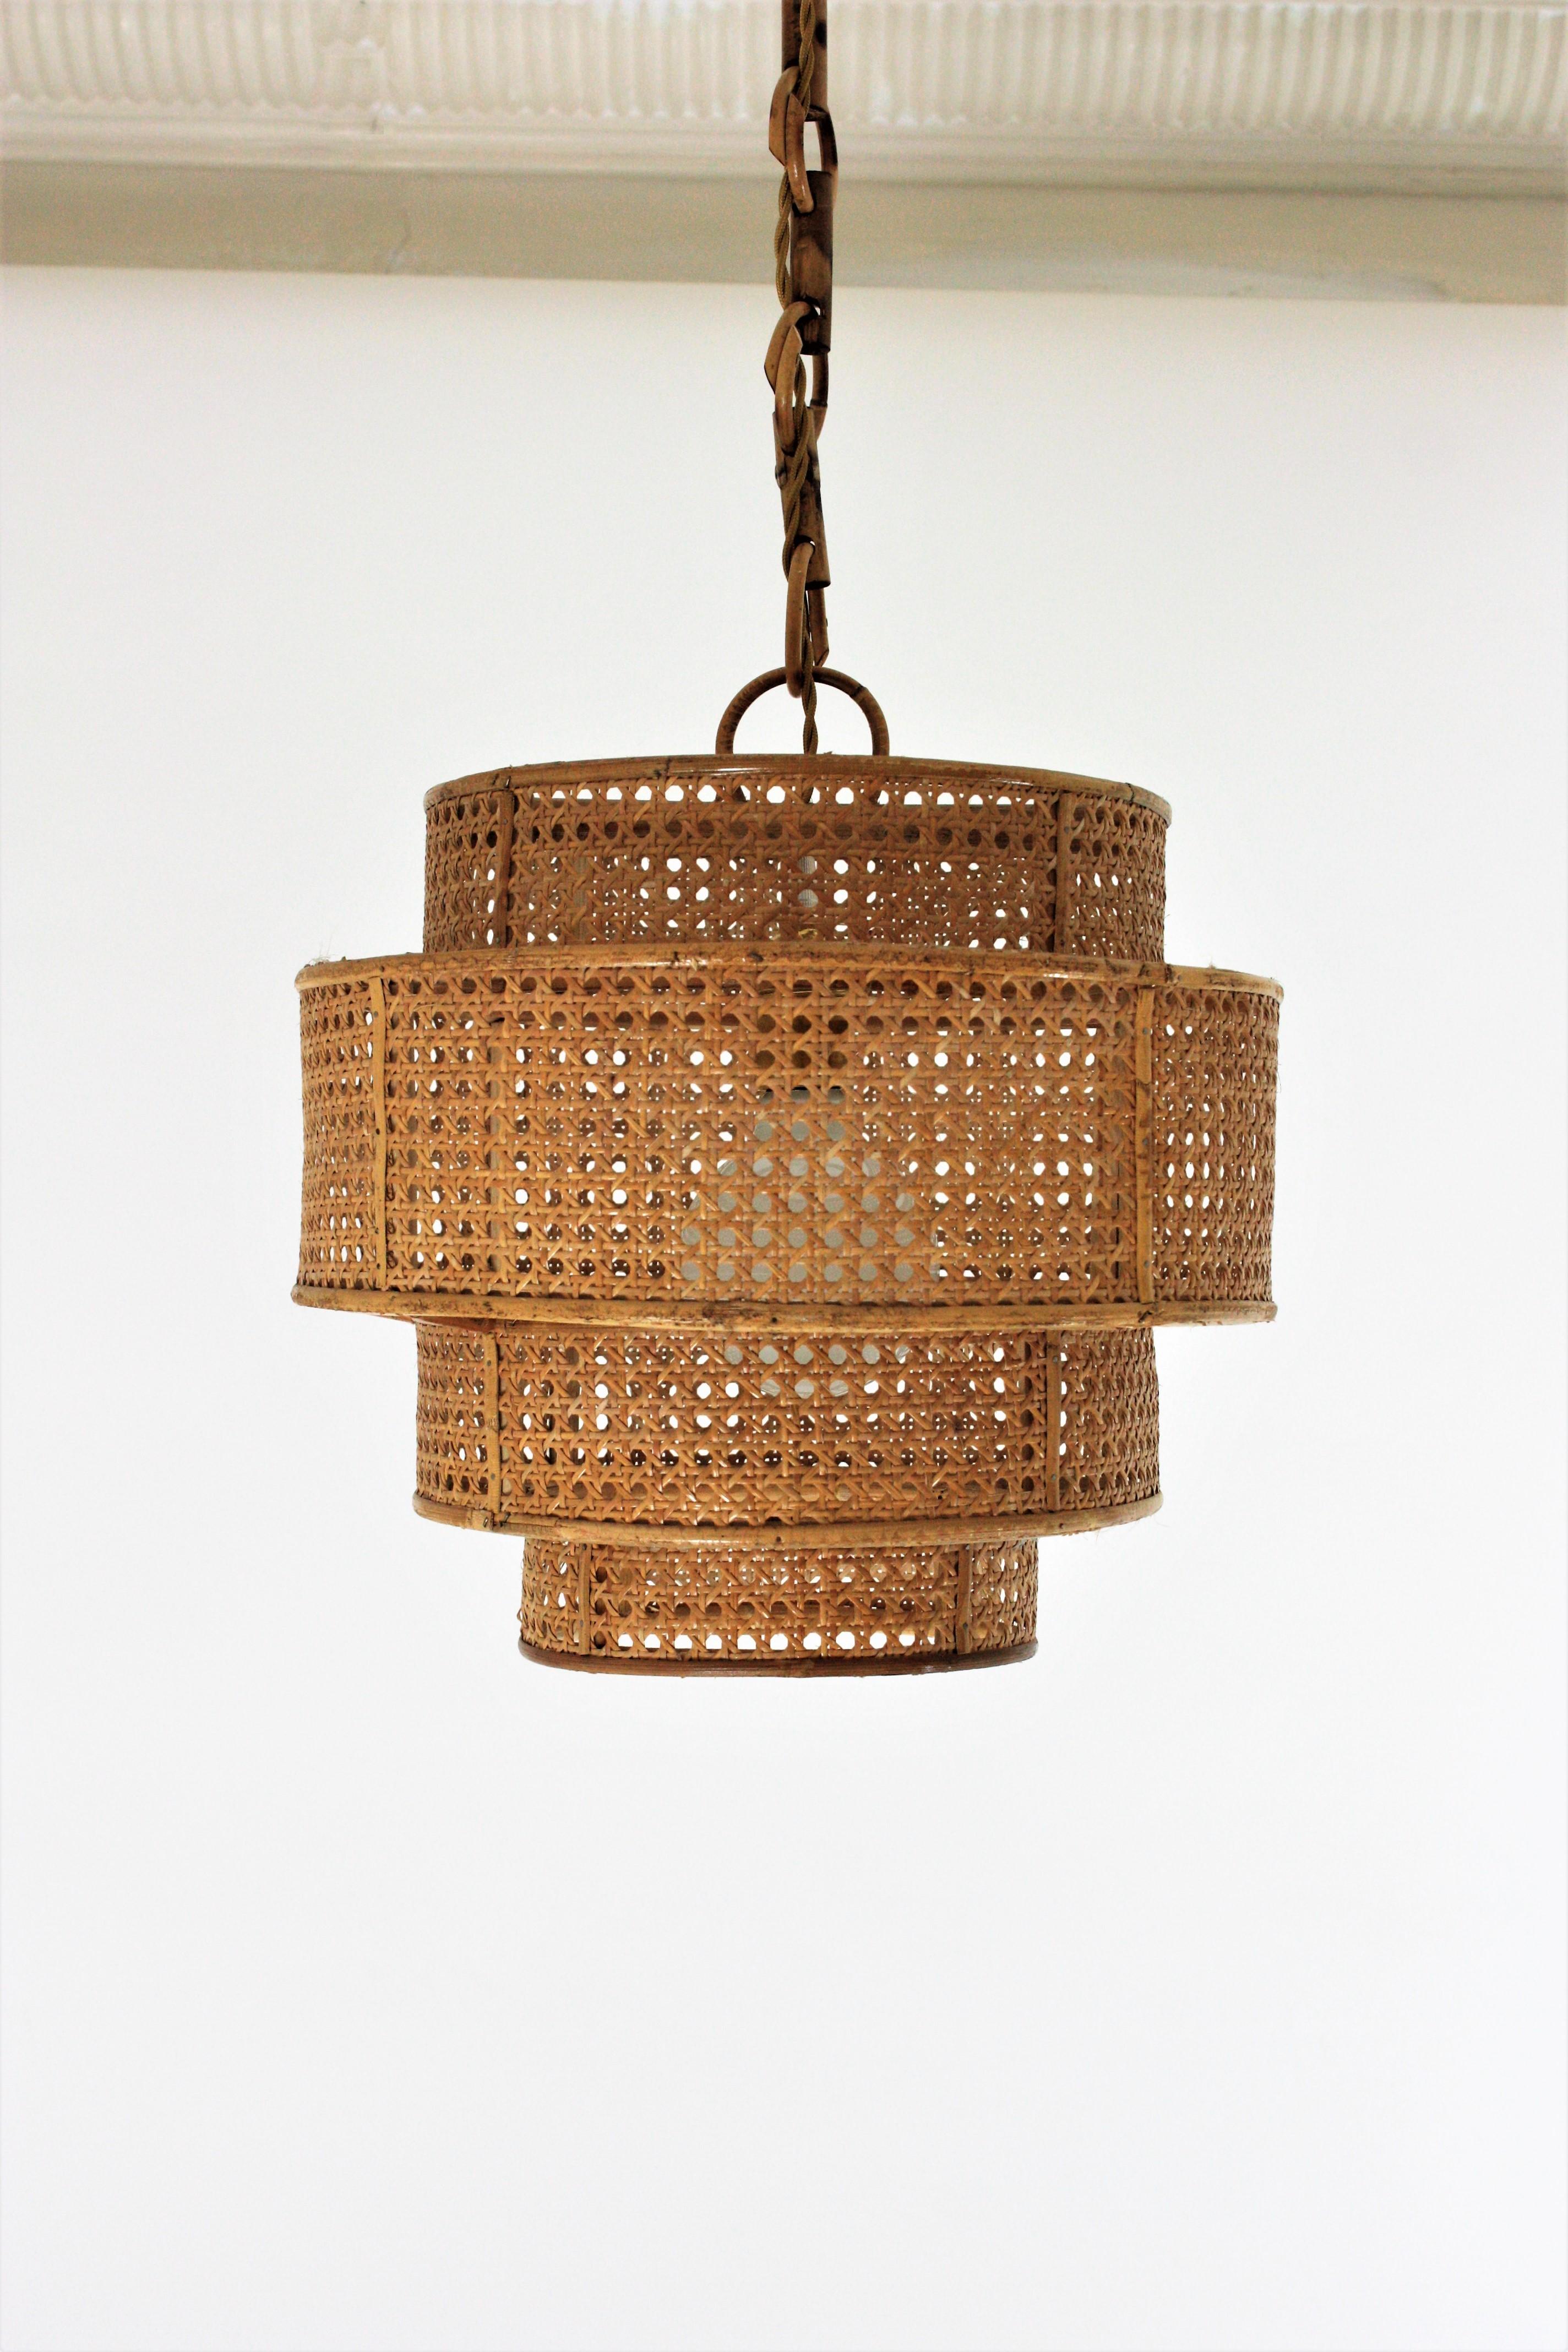  Rattan Wicker Weave Concentric Cylinder Pendant Hanging Light, 1960s For Sale 3